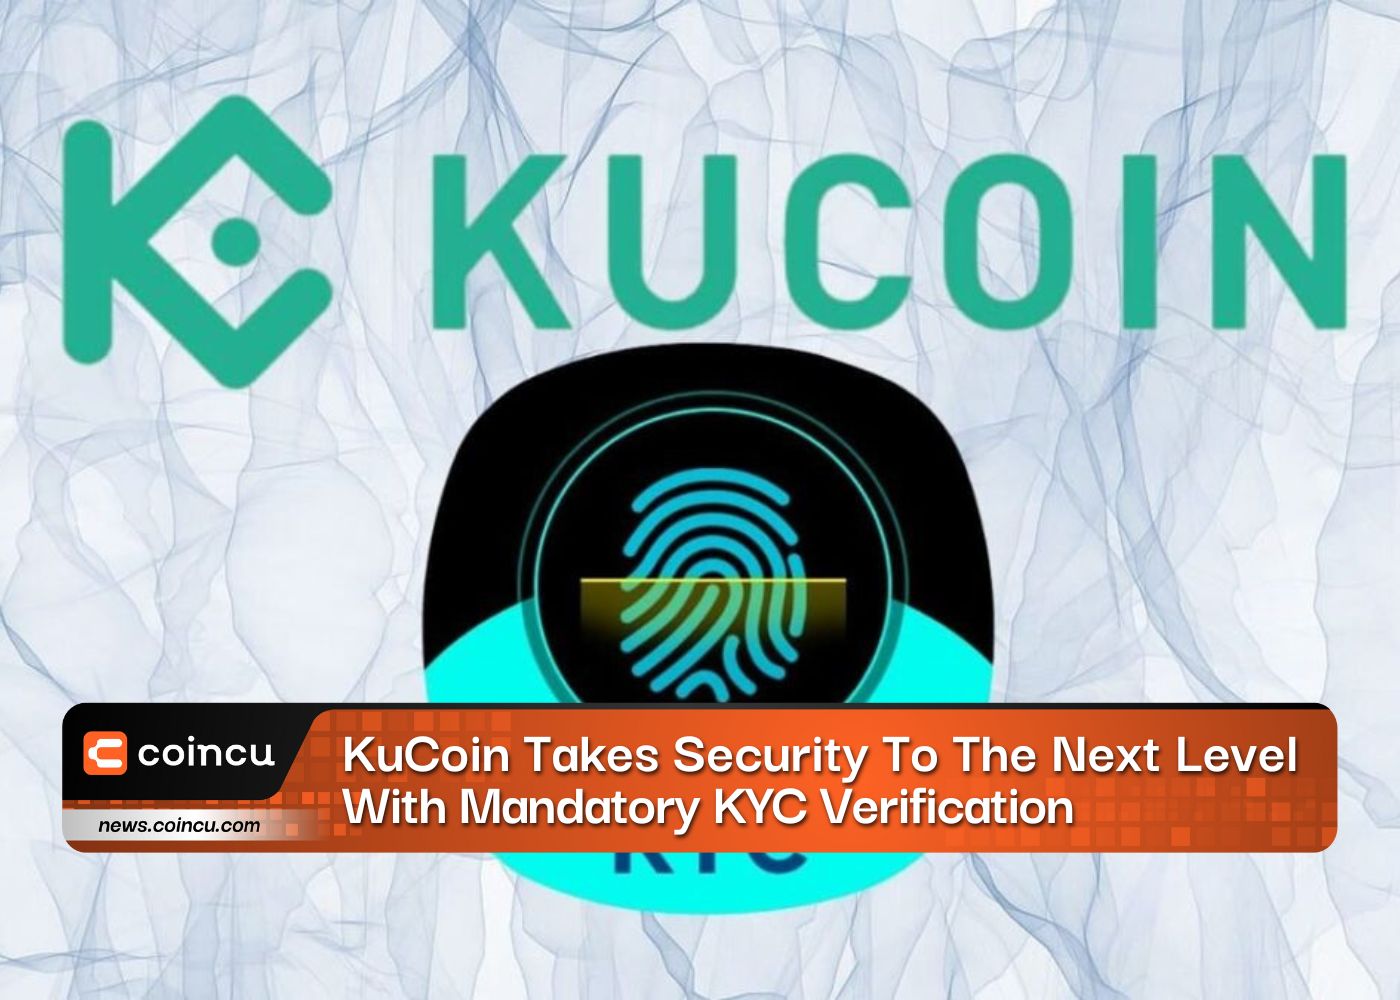 KuCoin Takes Security To The Next Level